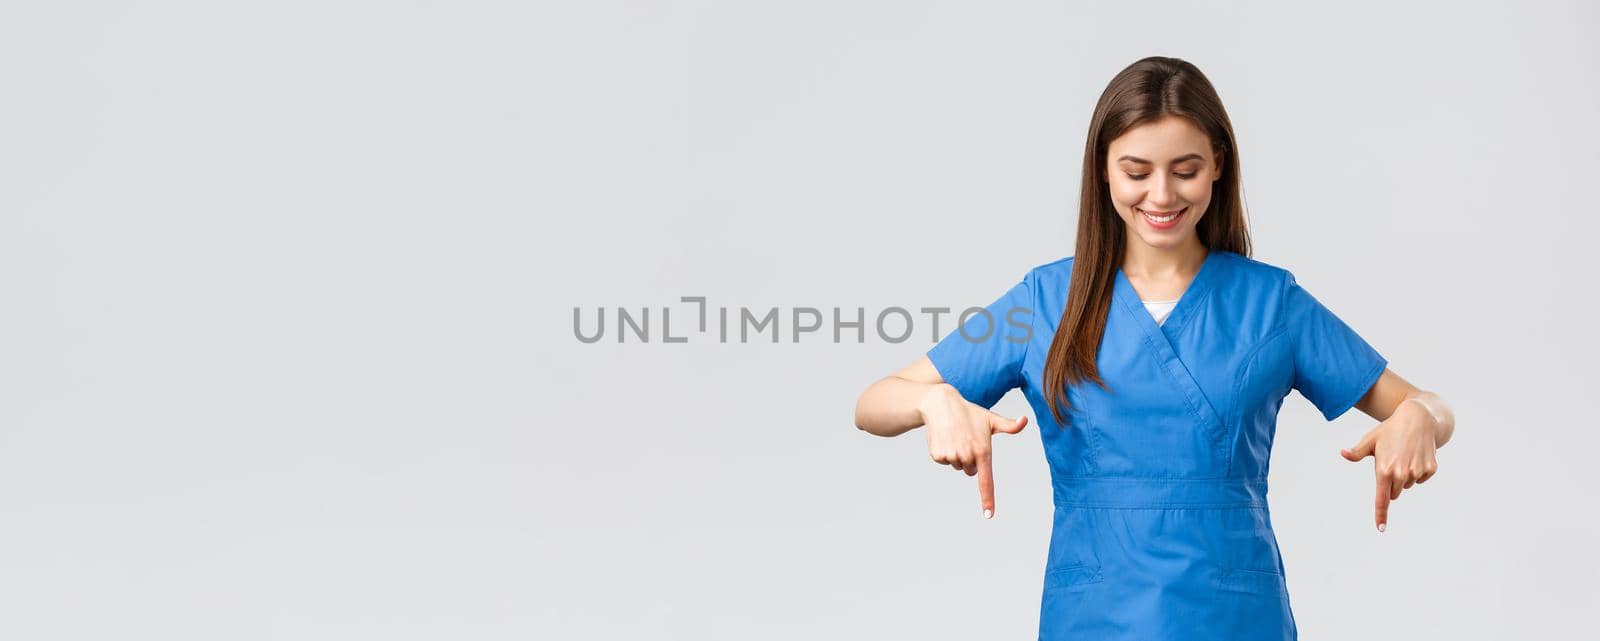 Healthcare workers, prevent virus, covid-19 test screening, medicine concept. Happy and pleased attractive female nurse or doctor, physician in blue scrubs, pointing looking down at advertisement.